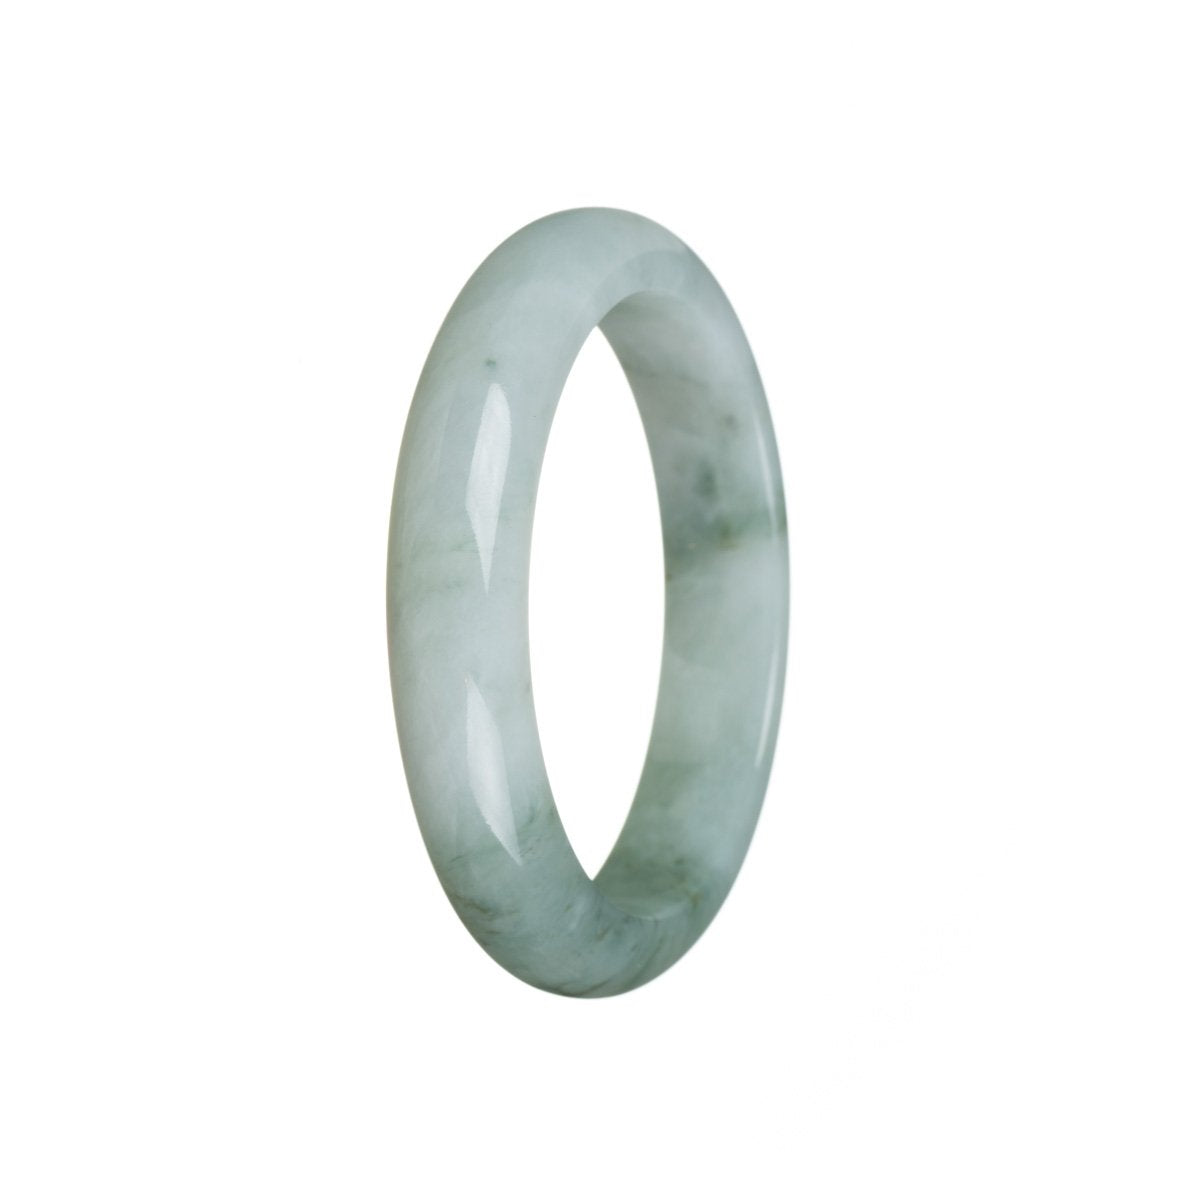 A close-up image of a certified Grade A greish green jadeite bangle, 55mm in size, with a semi-round shape. The bangle is made of high-quality jadeite and has a smooth, polished surface. It features a beautiful, natural green color with hints of grey, creating a unique and elegant appearance. The bangle is expertly crafted and certified by MAYS, ensuring its authenticity and value.